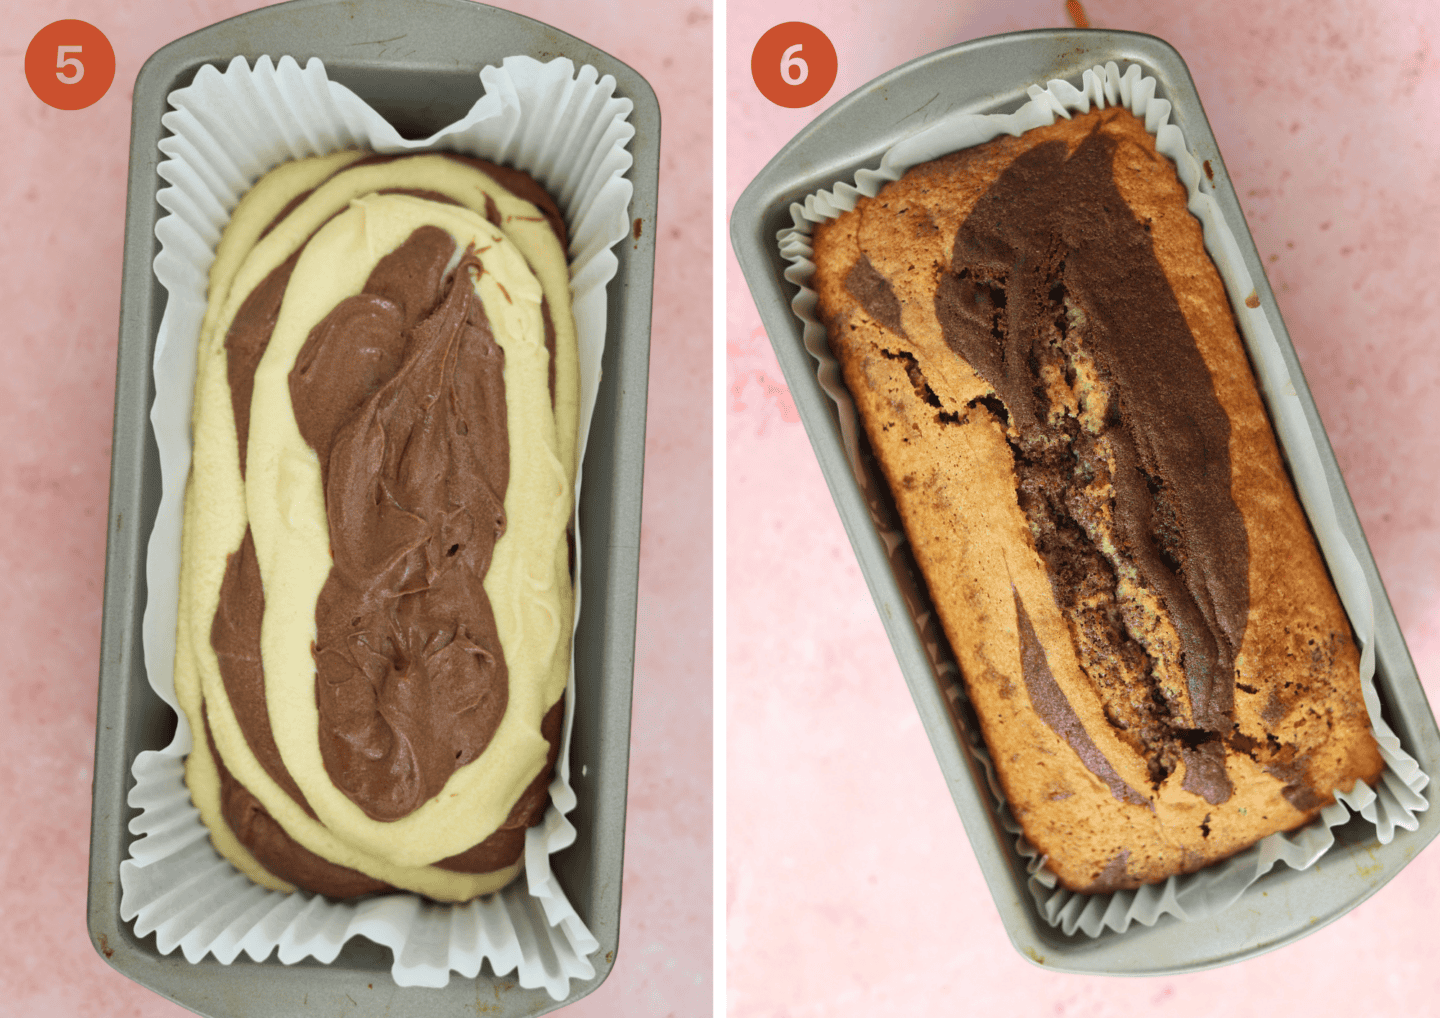 the gluten free marble cake batter before and after baking.